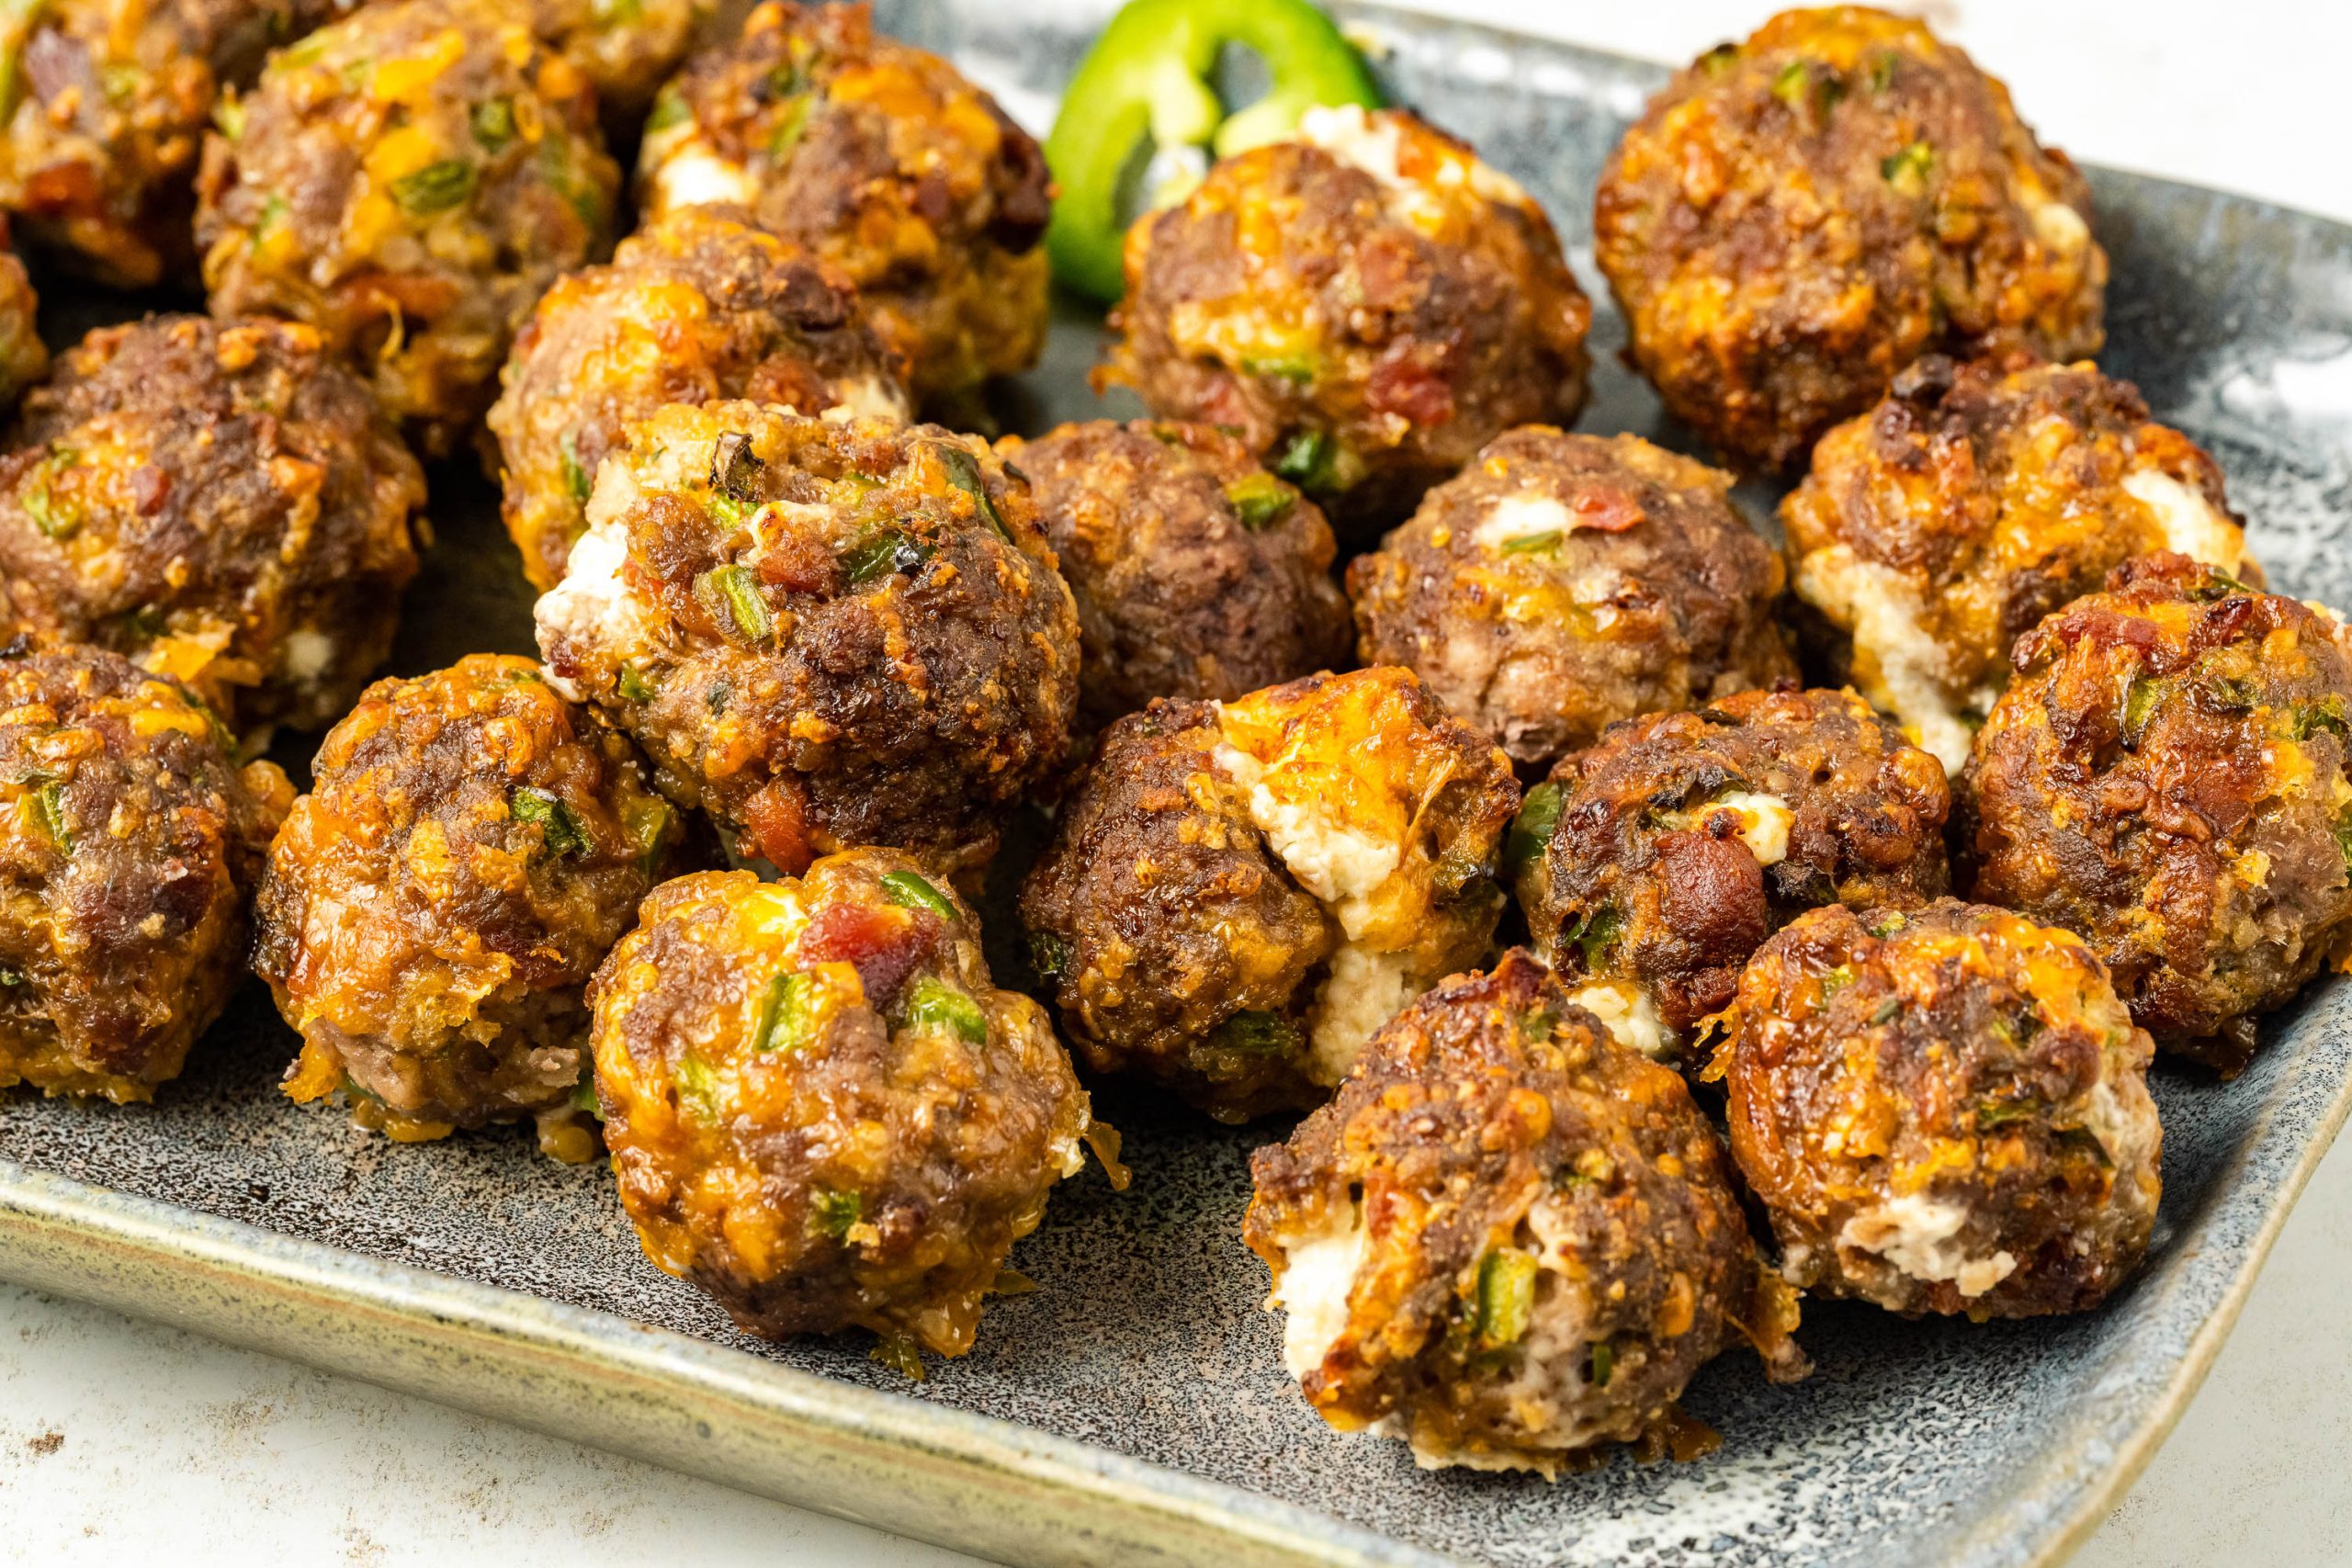 Meatballs on a plate with jalapenos.